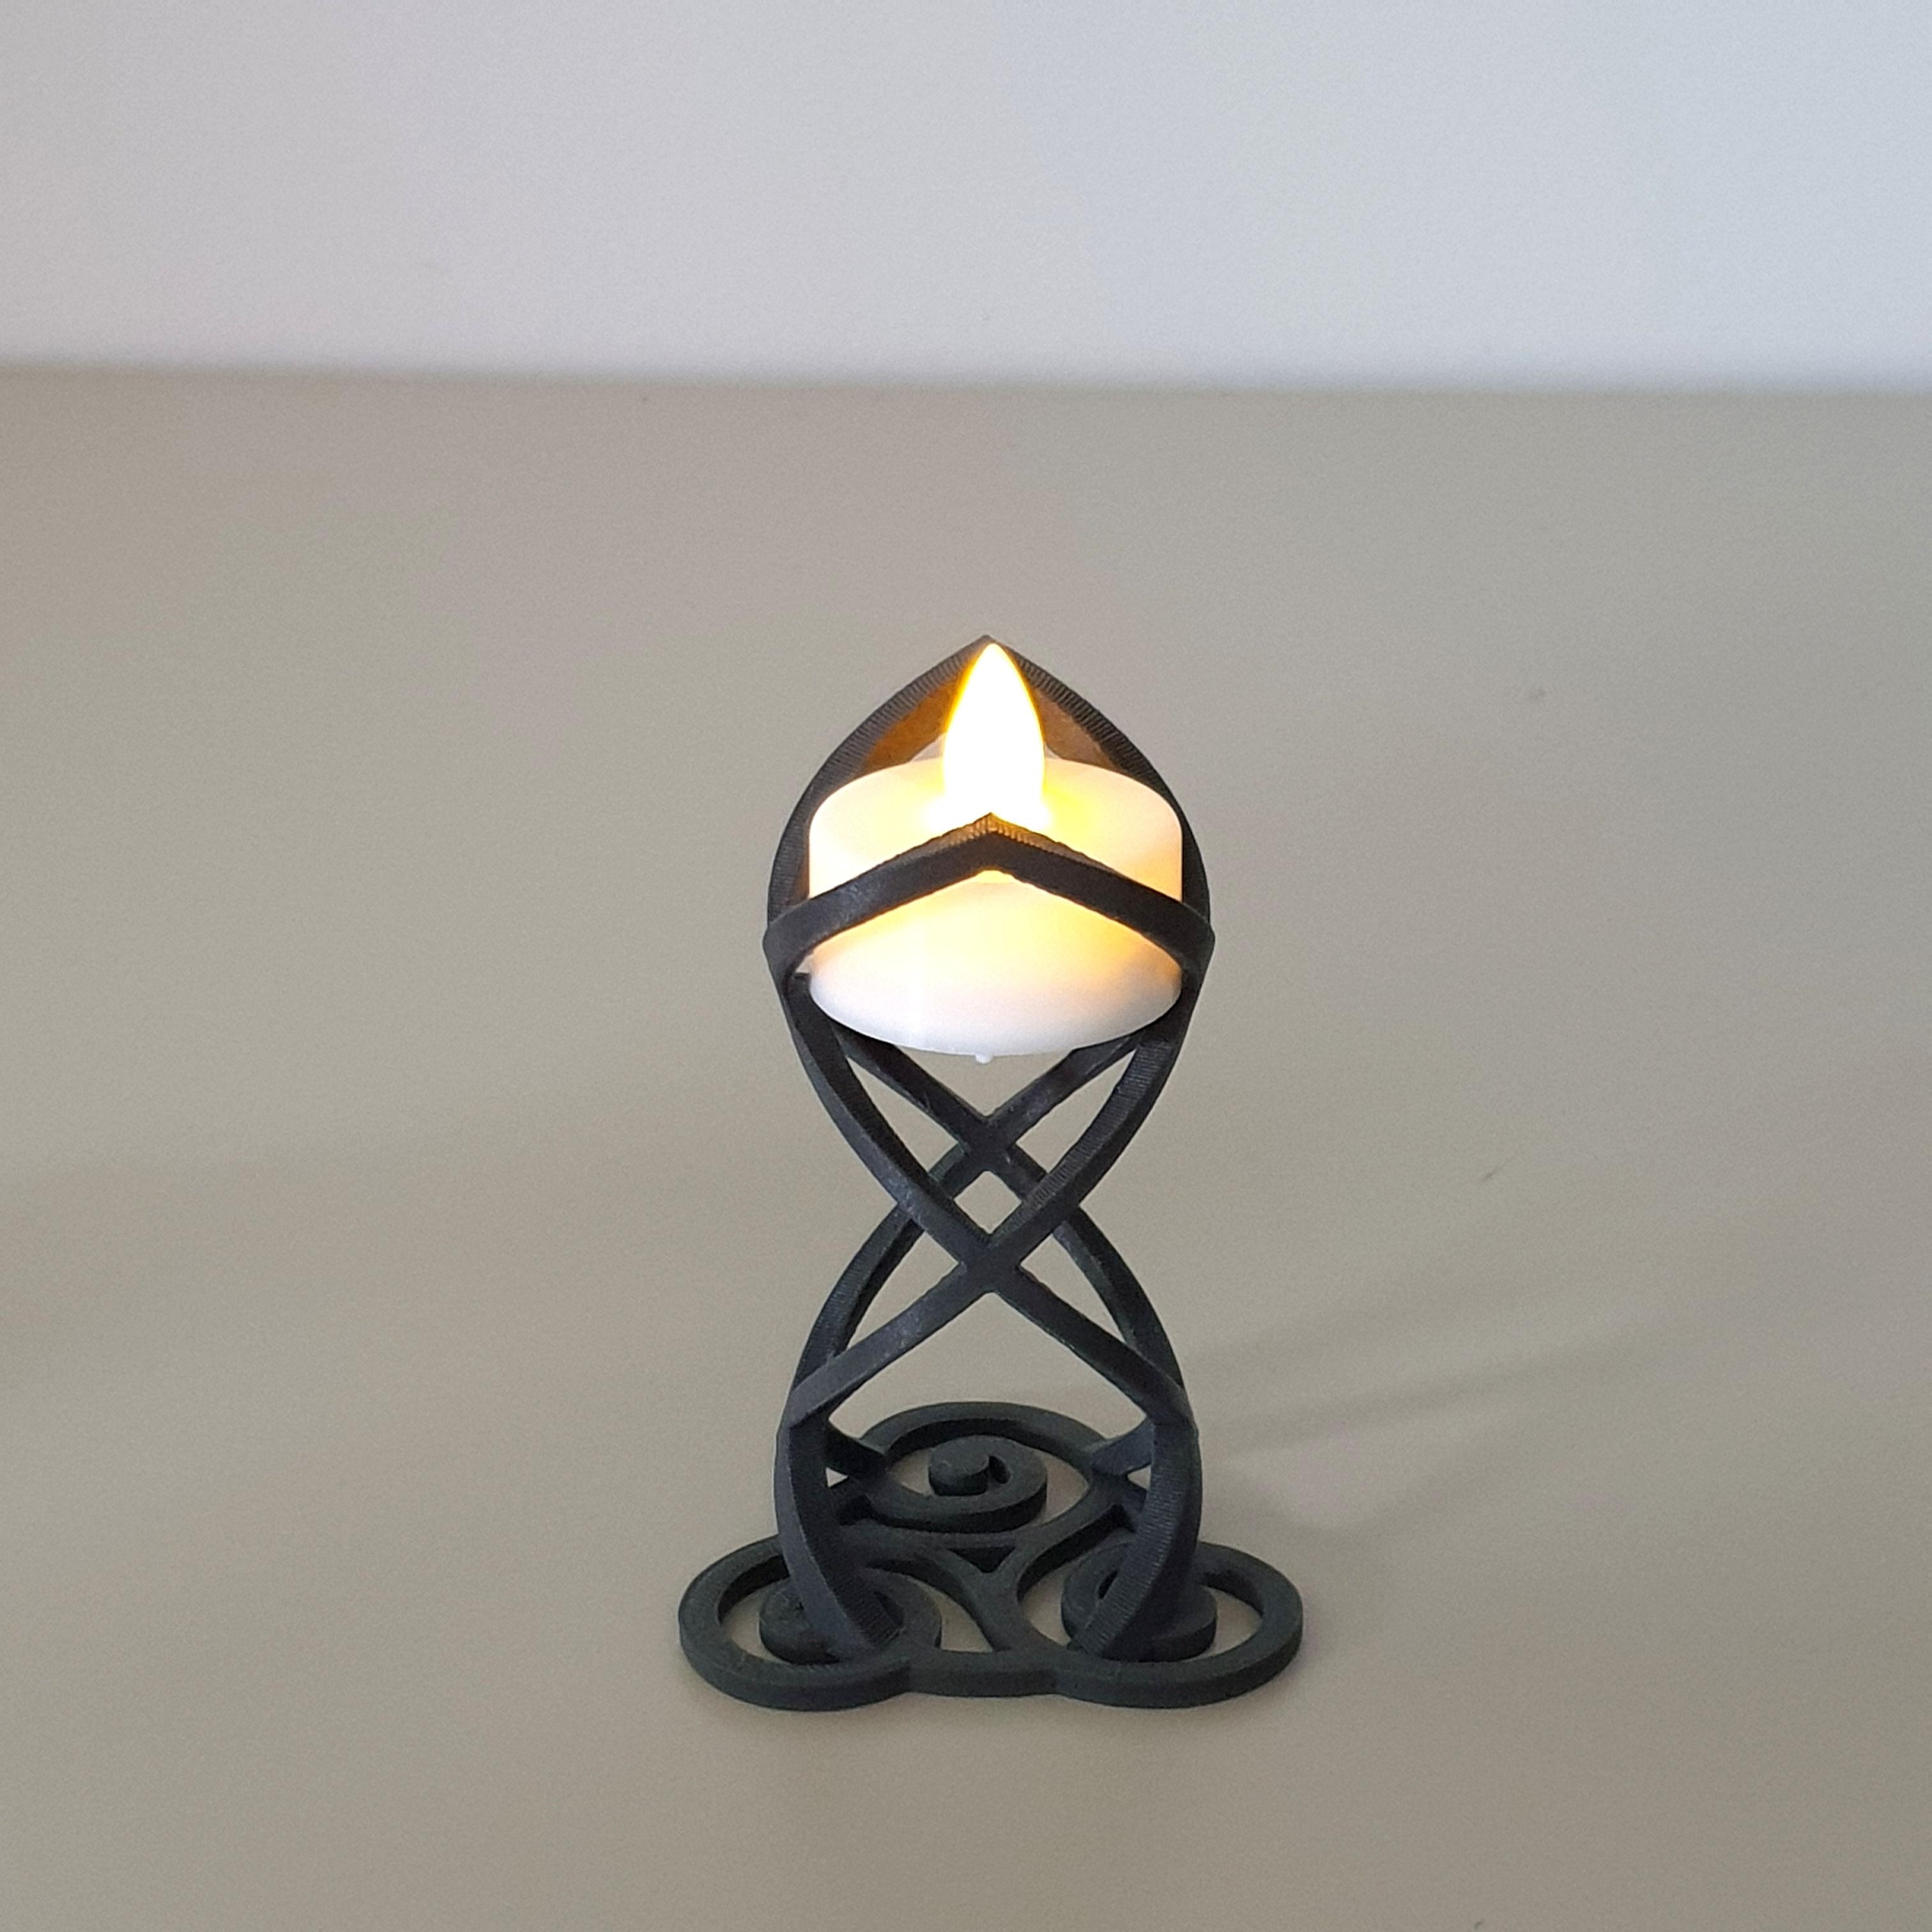 Tealight holder - no supports 3d model